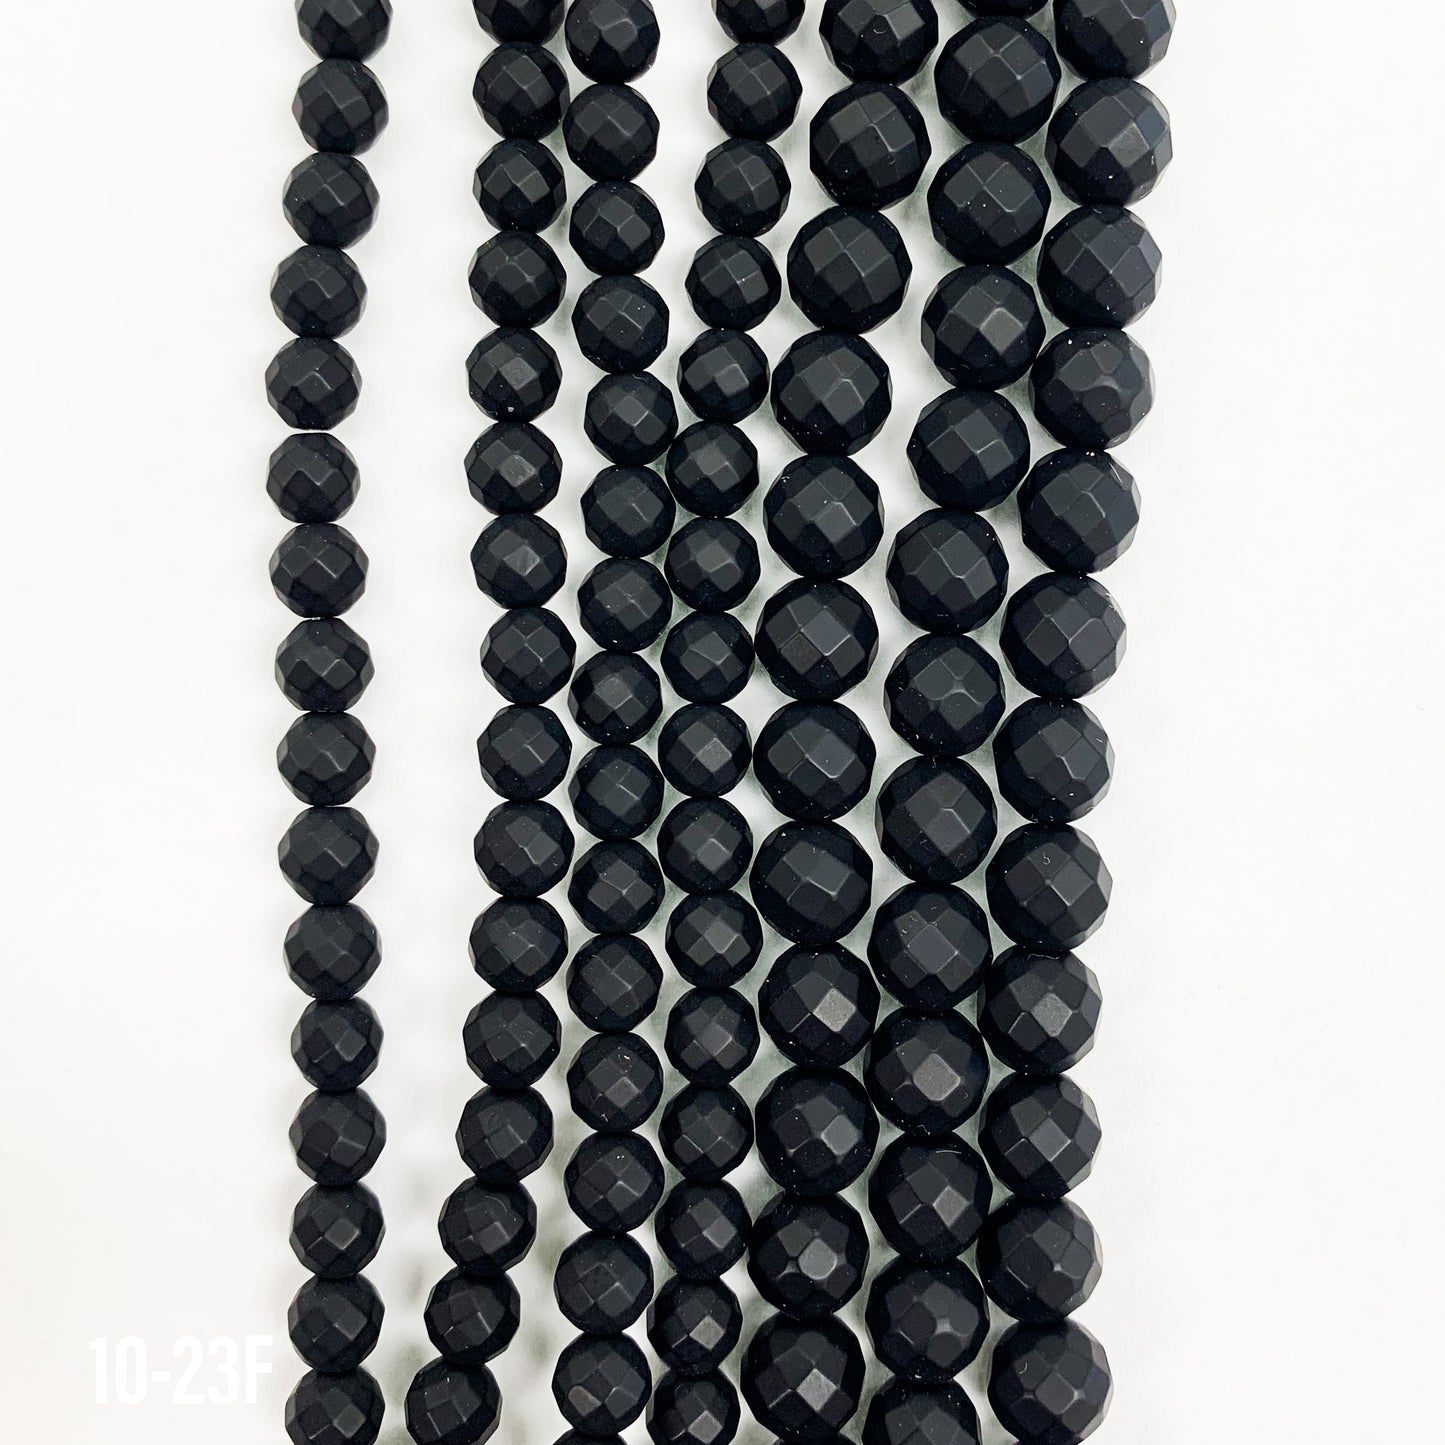 Natural Matte Onyx Beads Faceted 8mm